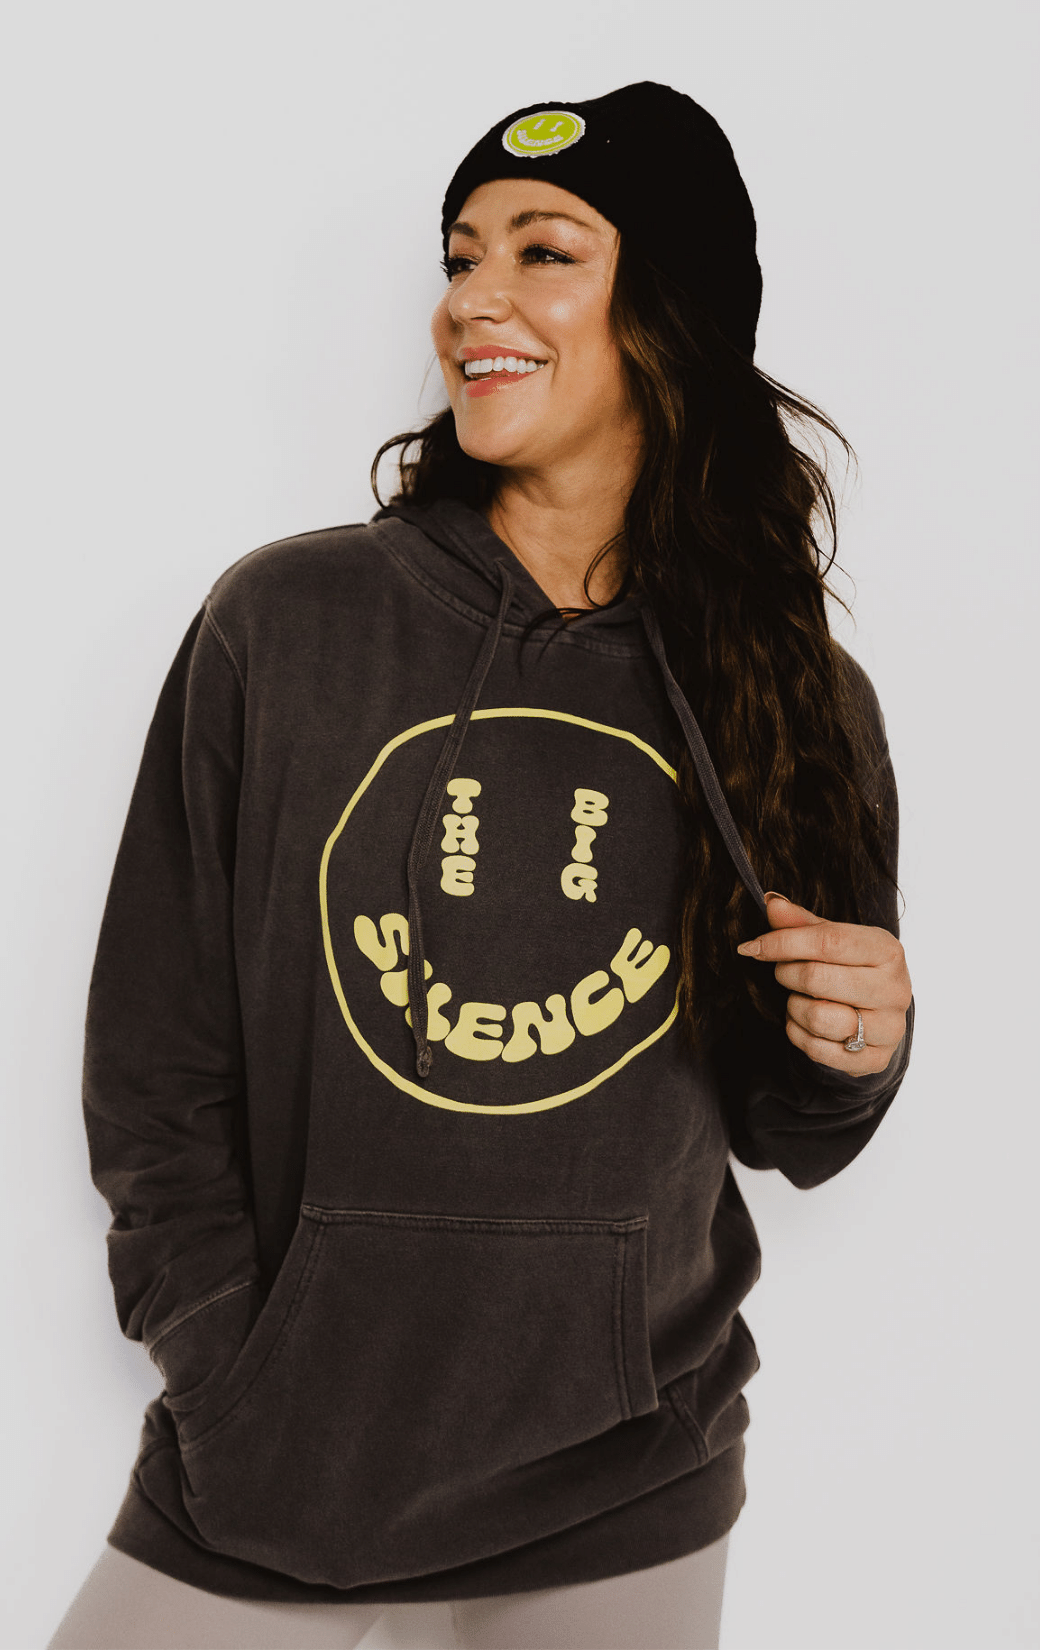 The Smiley Hoodie